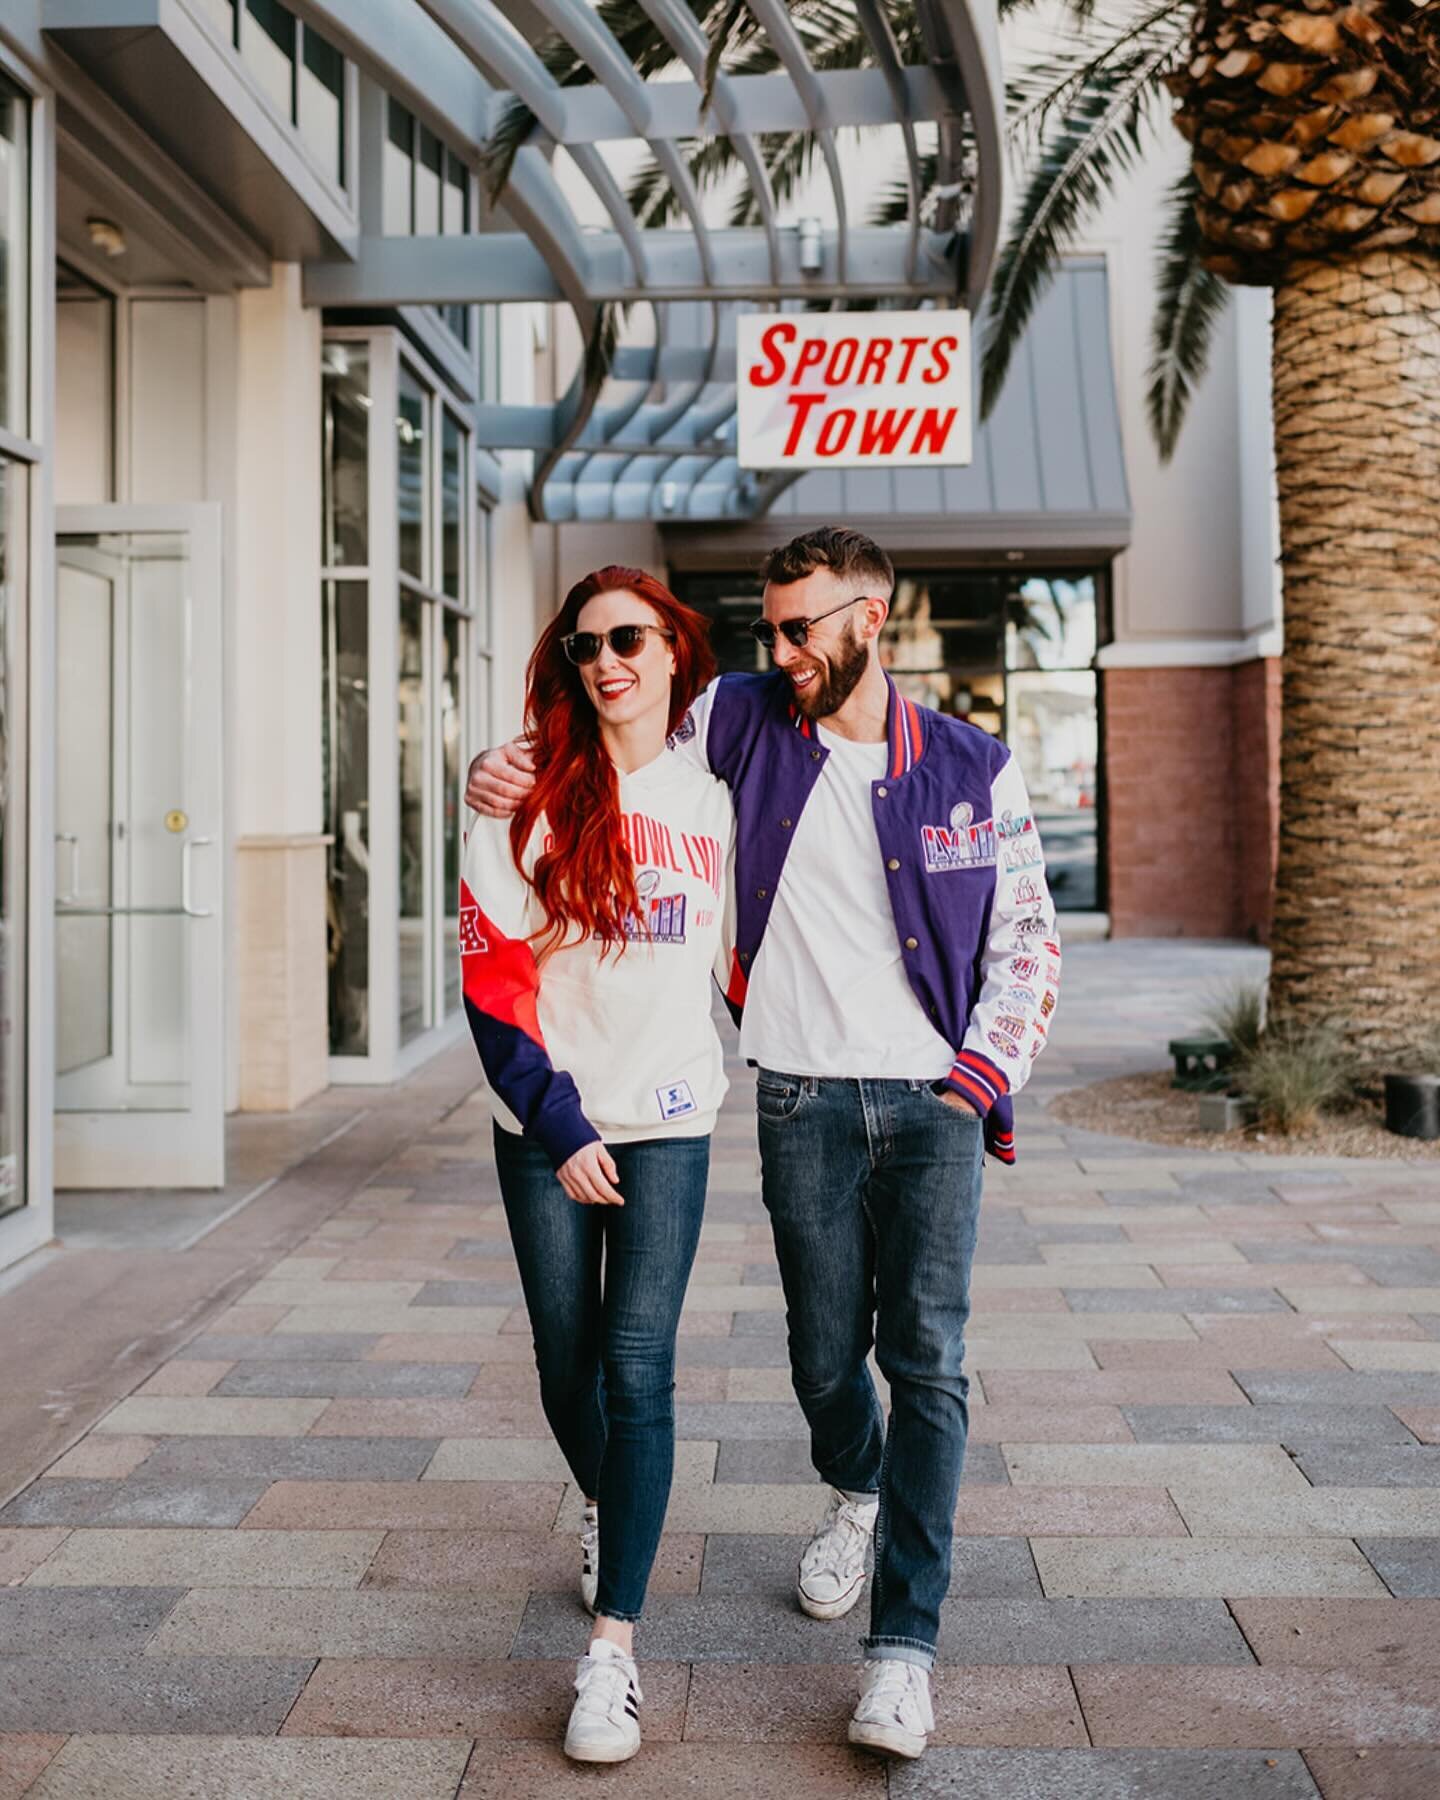 Recent work with @downtownsummerlin. 
.
It&rsquo;s so cool to have the Super Bowl hosted here in Vegas this year! Loved shooting some of the official Super Bowl merch sold at @sportstown_dts. 🏈